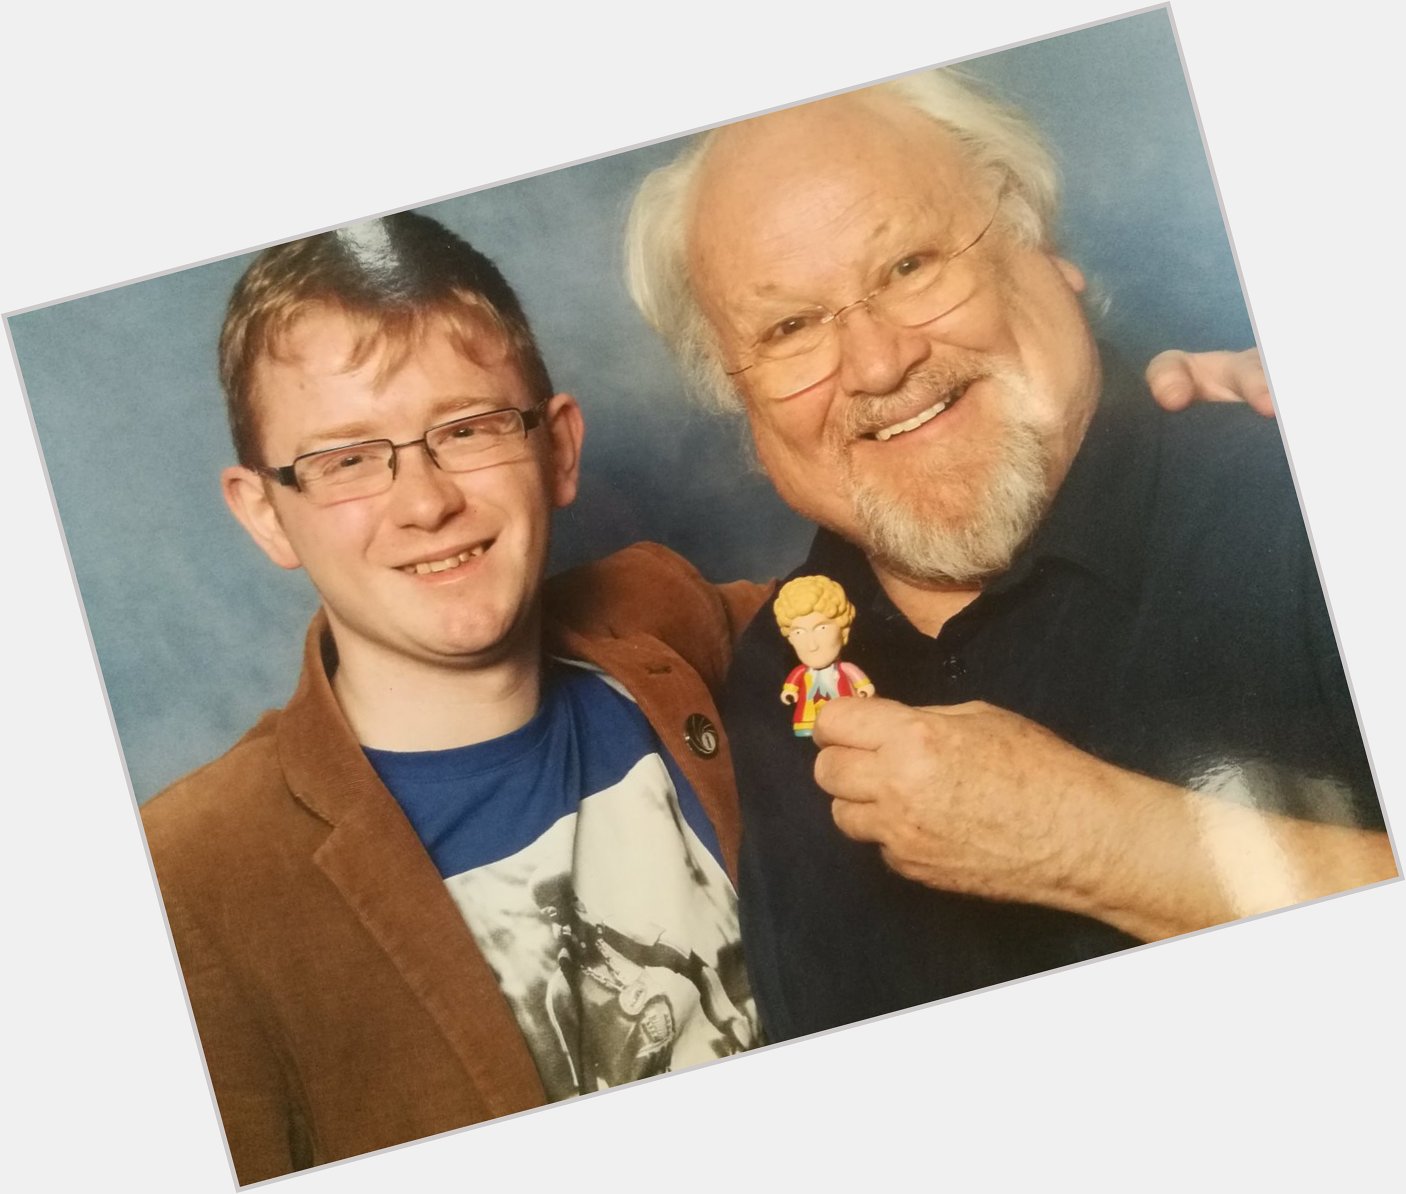 Wishing the Sixth Doctor himself, Colin Baker, a Happy Birthday!   